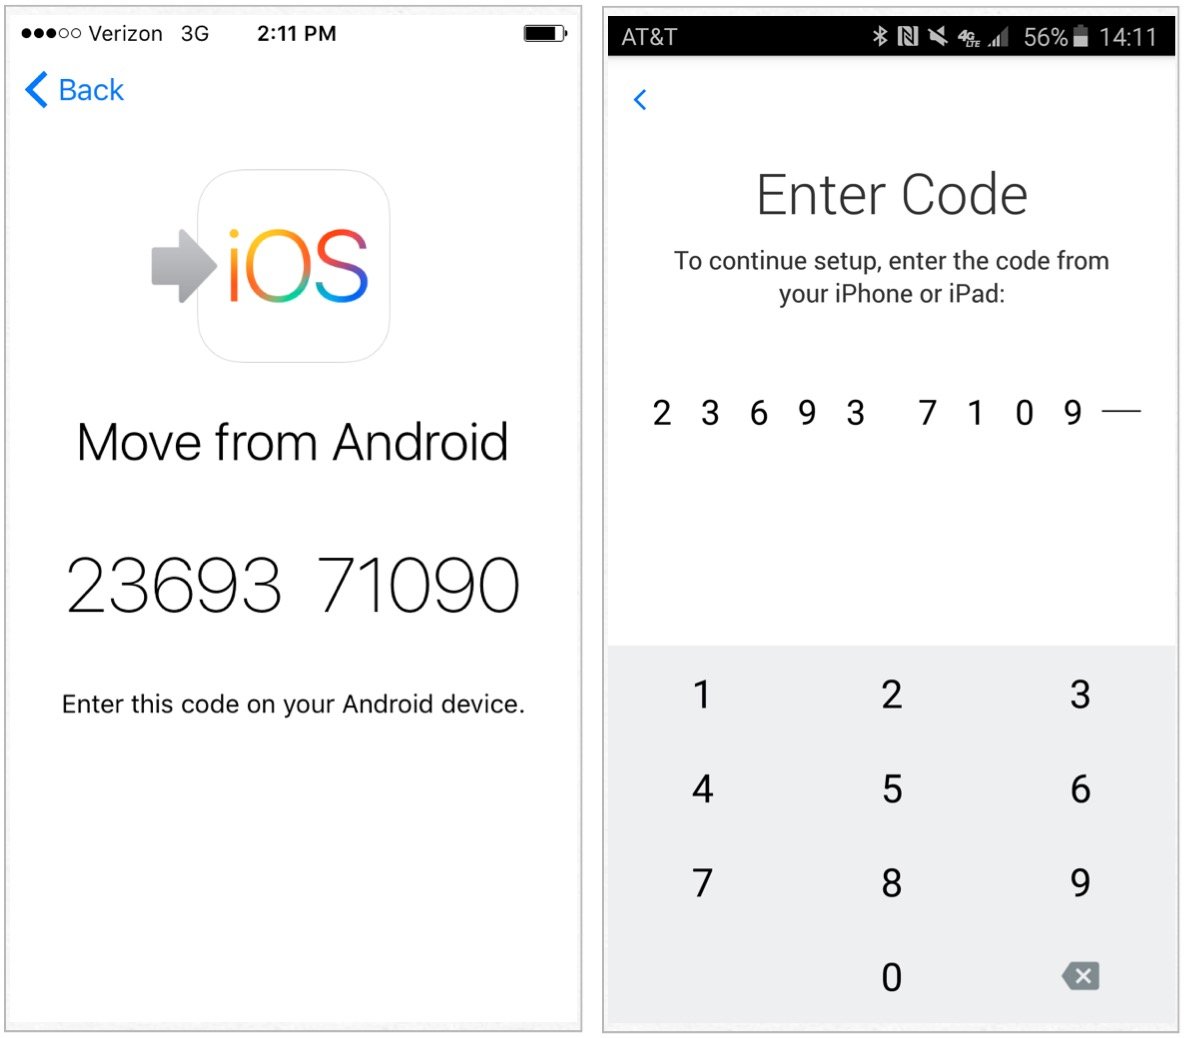 To move your data from Android to iPhone or iPad with Move to iOS, on your Android device enter the 12-digit code displayed on iPhone/iPad